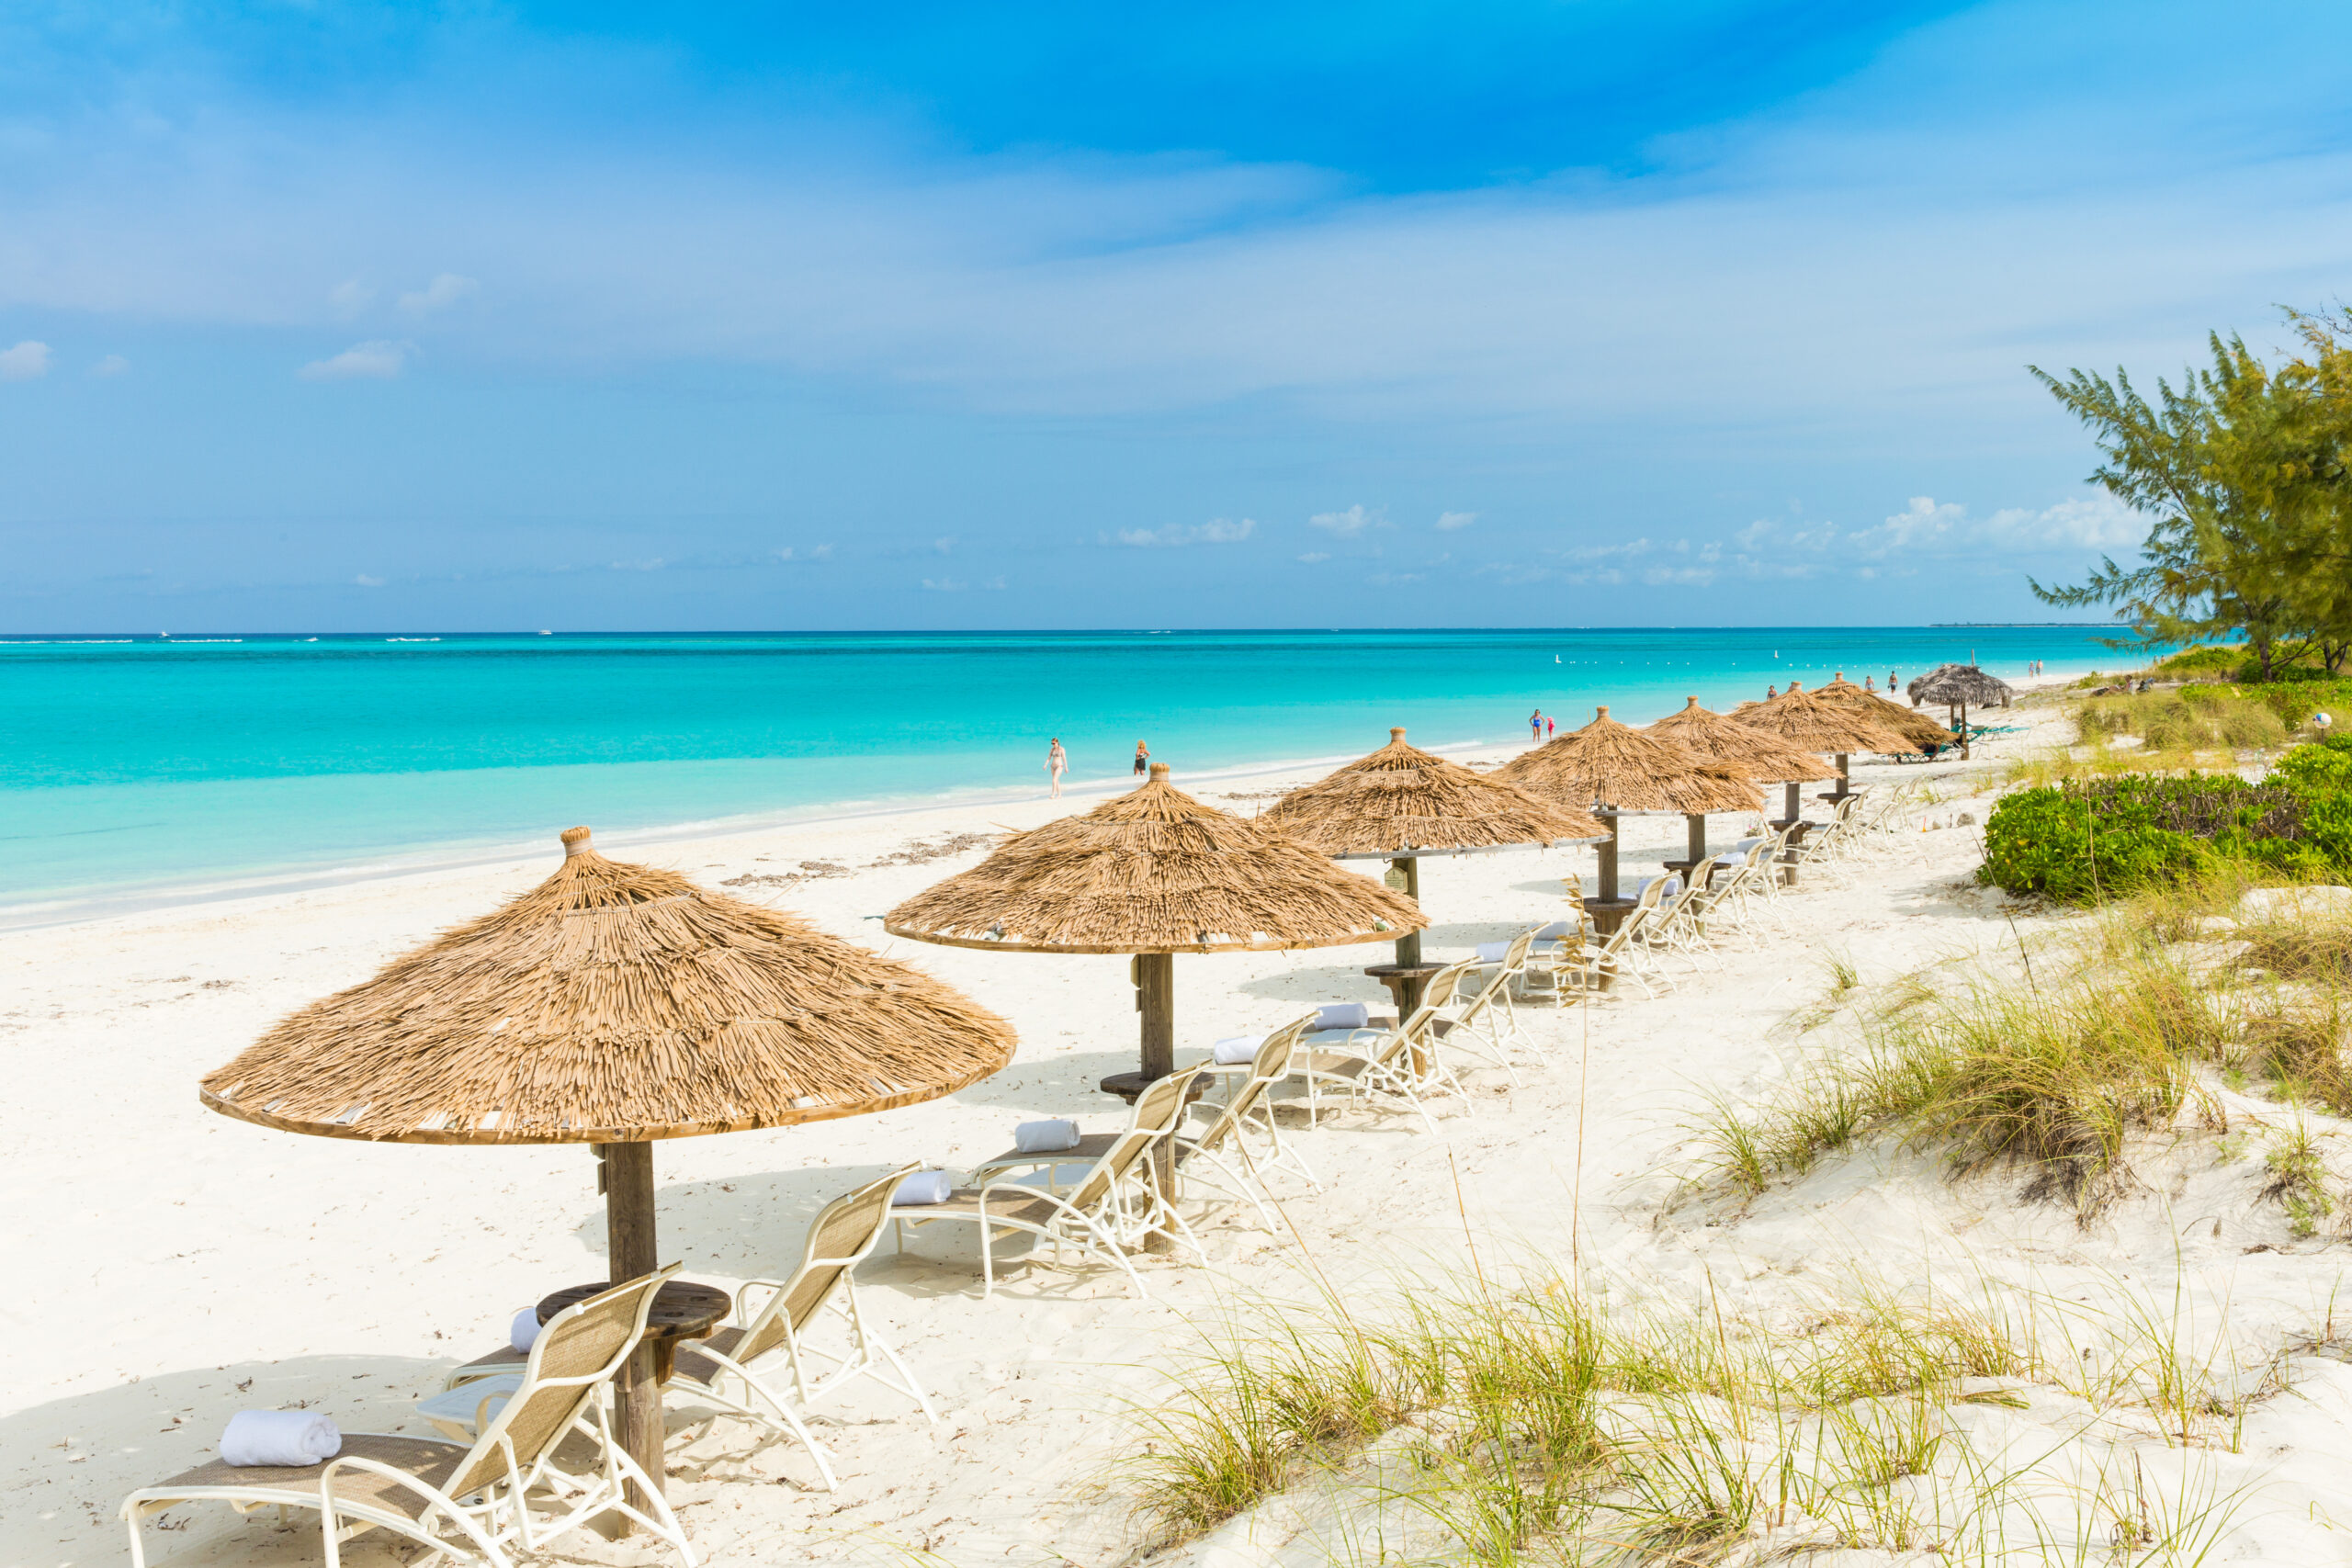 The Sands at Grace Bay #1 Caribbean Resort in USA TODAY's 10Best Readers' Choice Awards